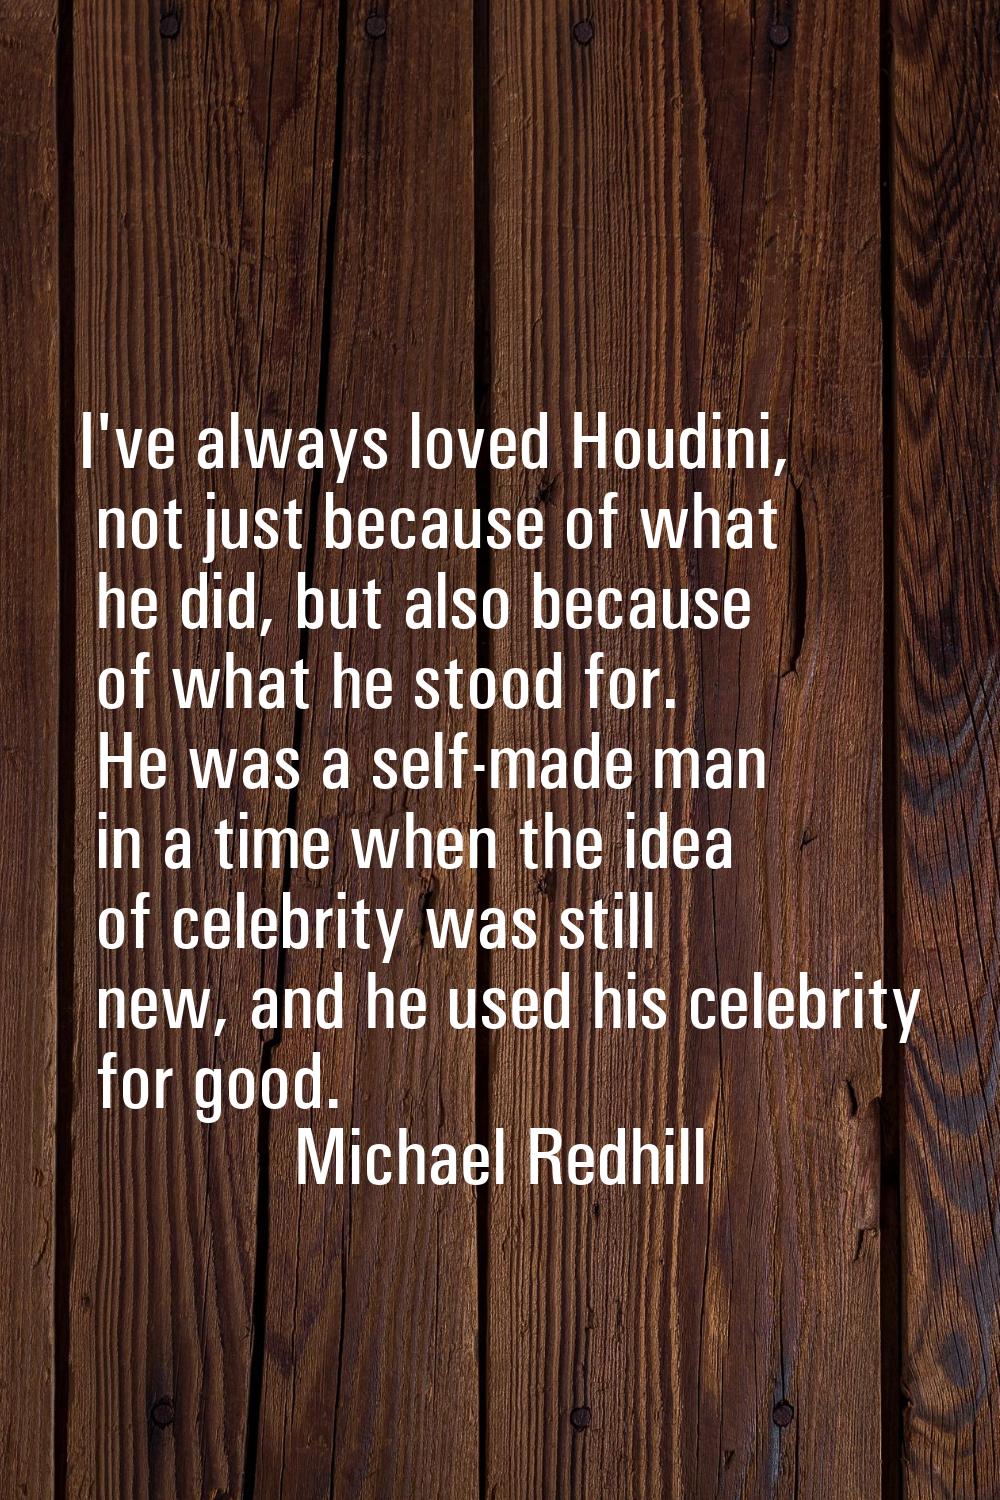 I've always loved Houdini, not just because of what he did, but also because of what he stood for. 